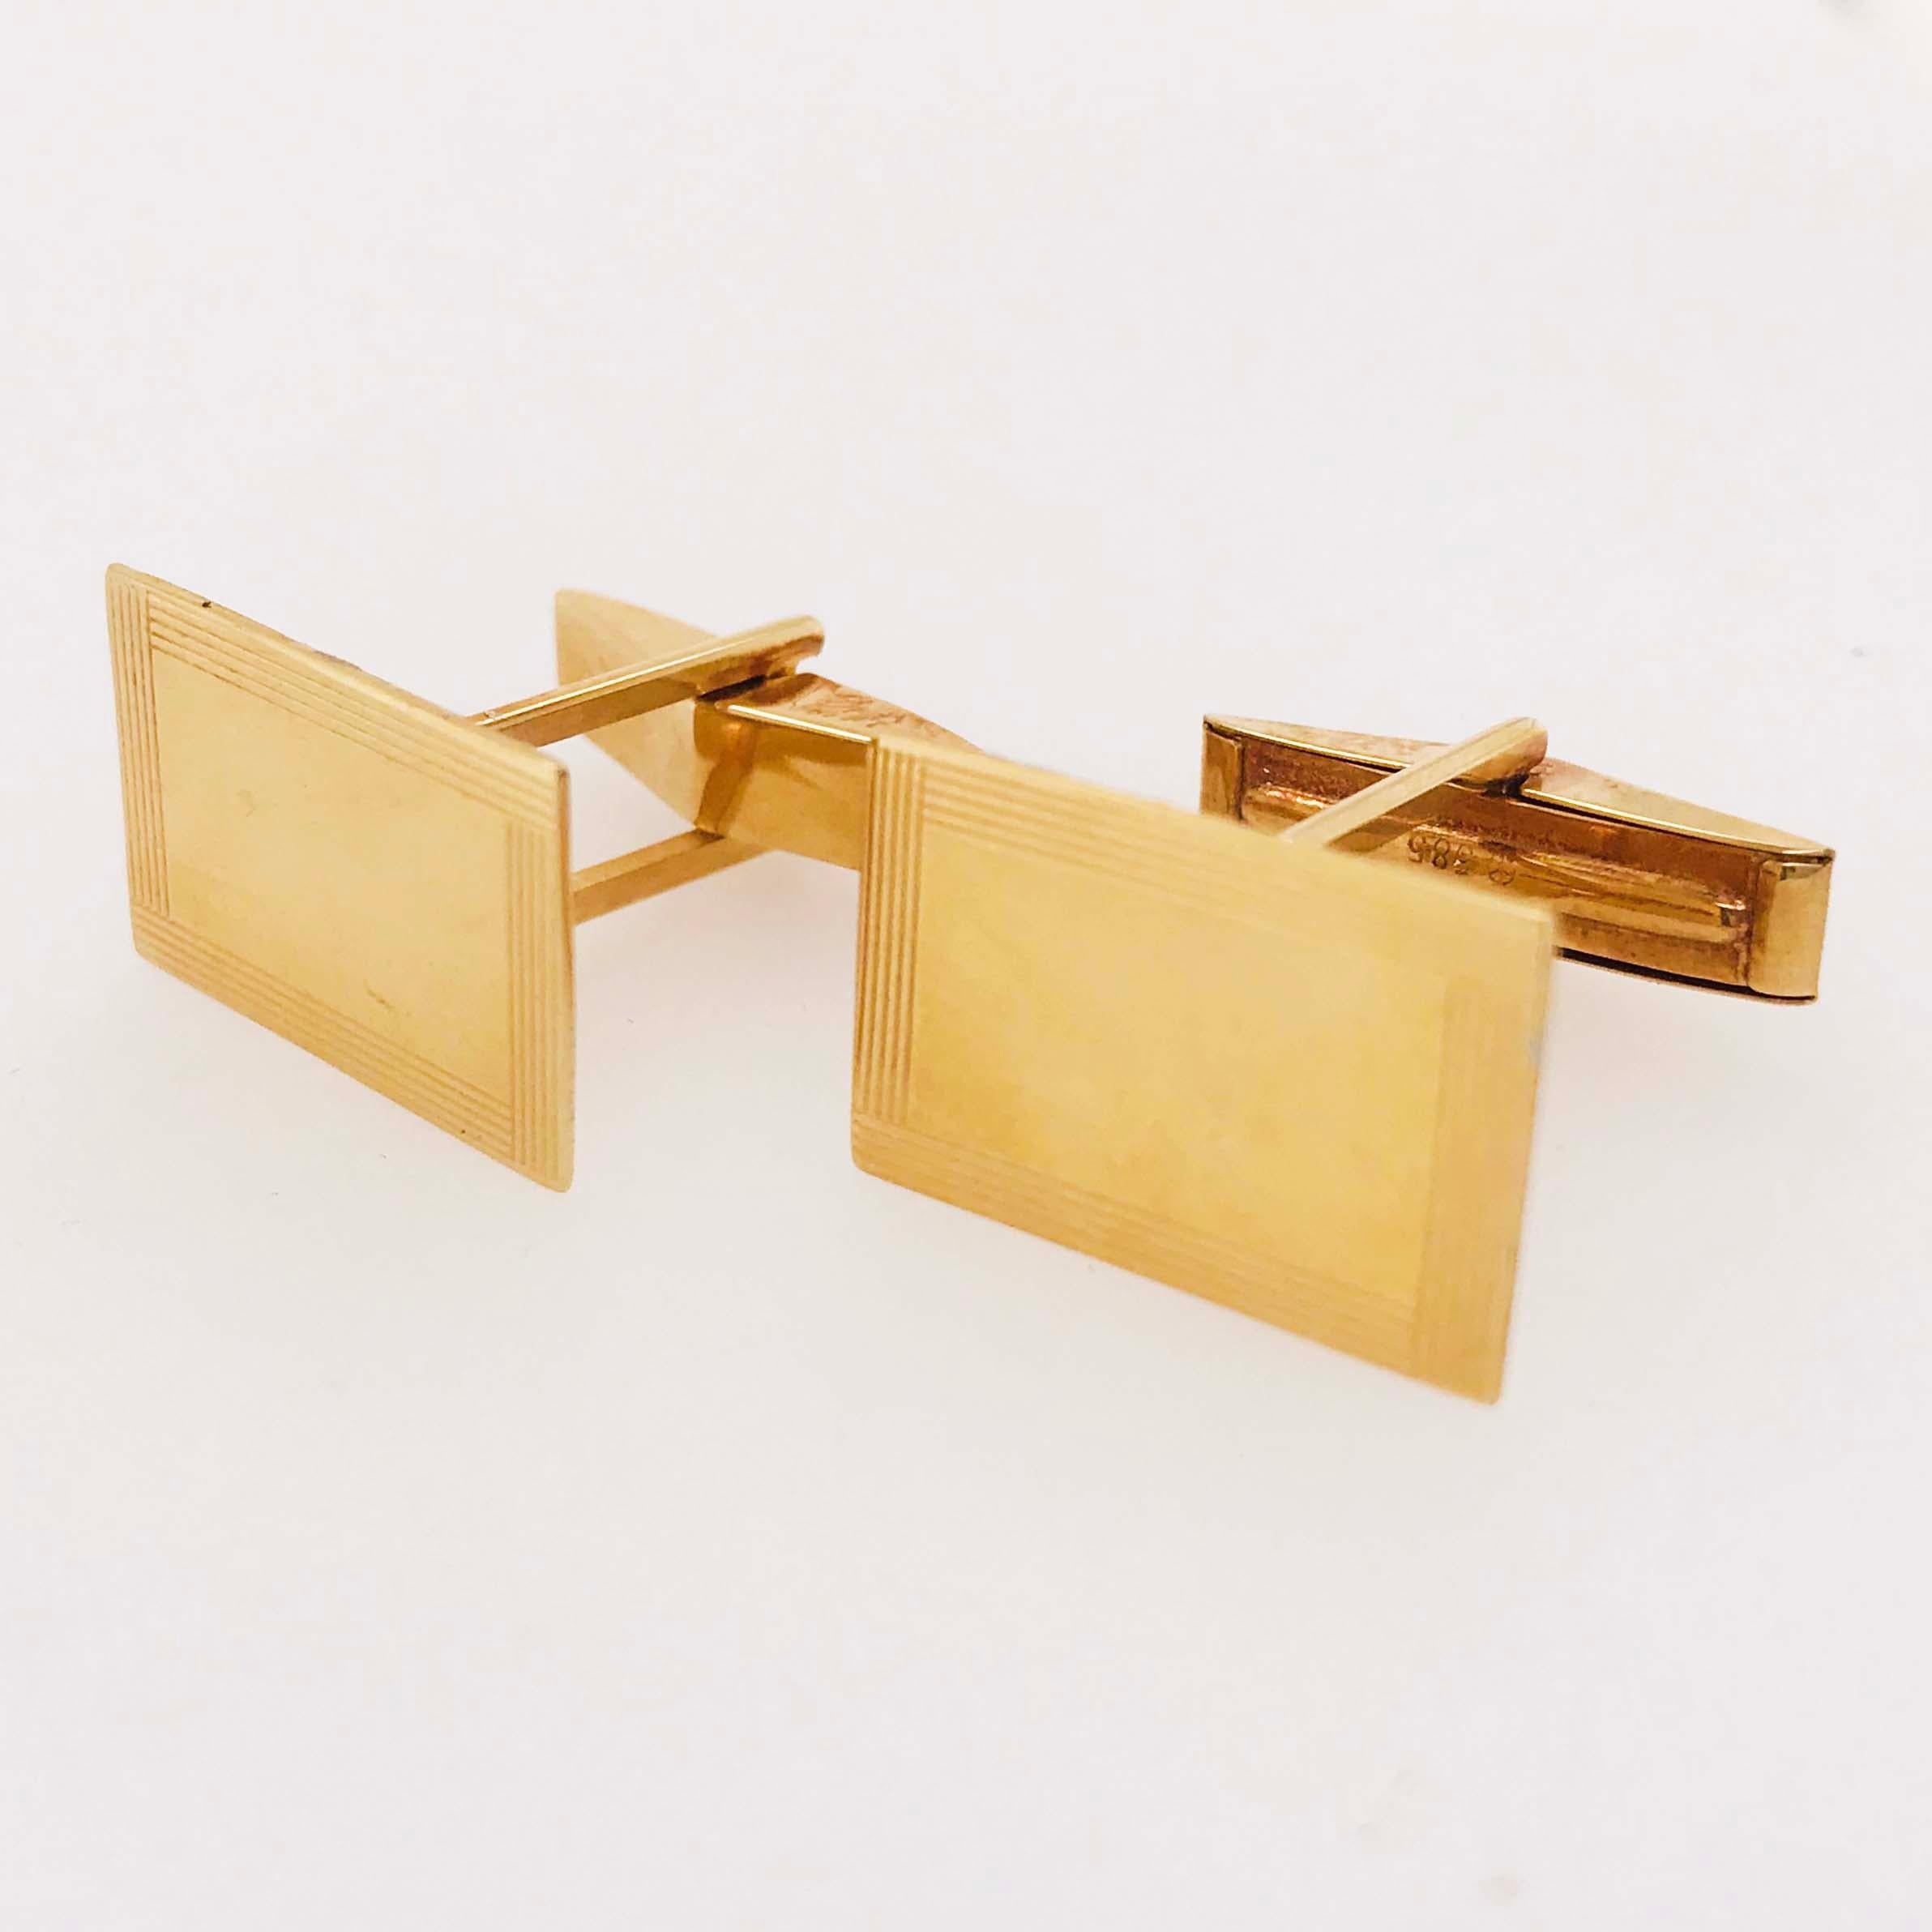 Women's or Men's Gold Engraving Plate Cufflinks, Men's Cufflinks with Rectangle 14k Gold Plate